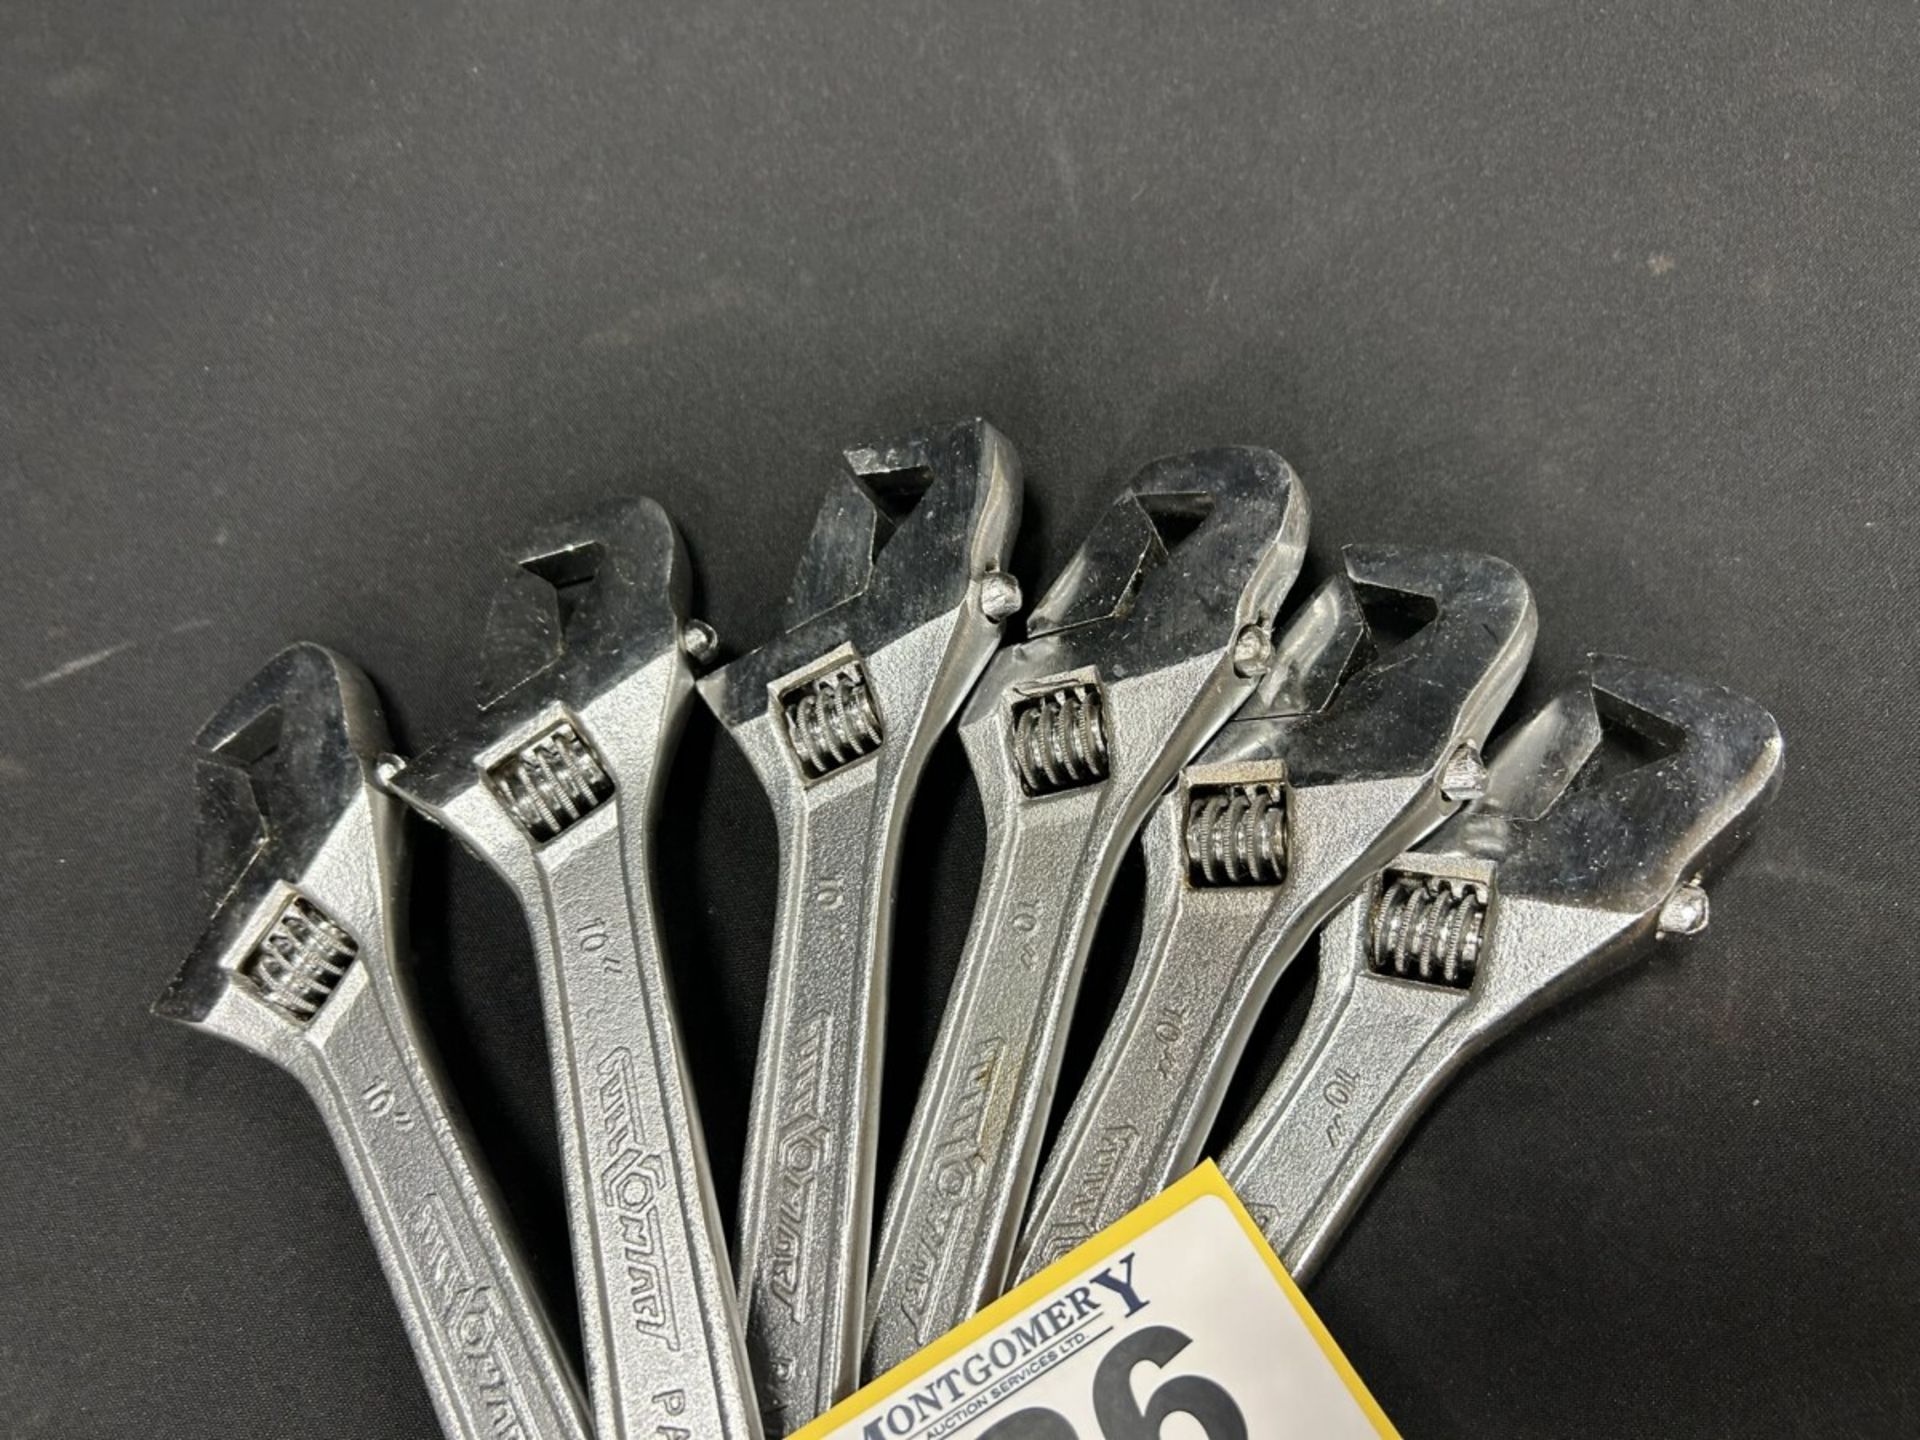 3/8" - 15/16" RATCHET RING SPANNER W/ 6 FULL CONTACT ADJUSTABLE WRENCHES - Image 3 of 5